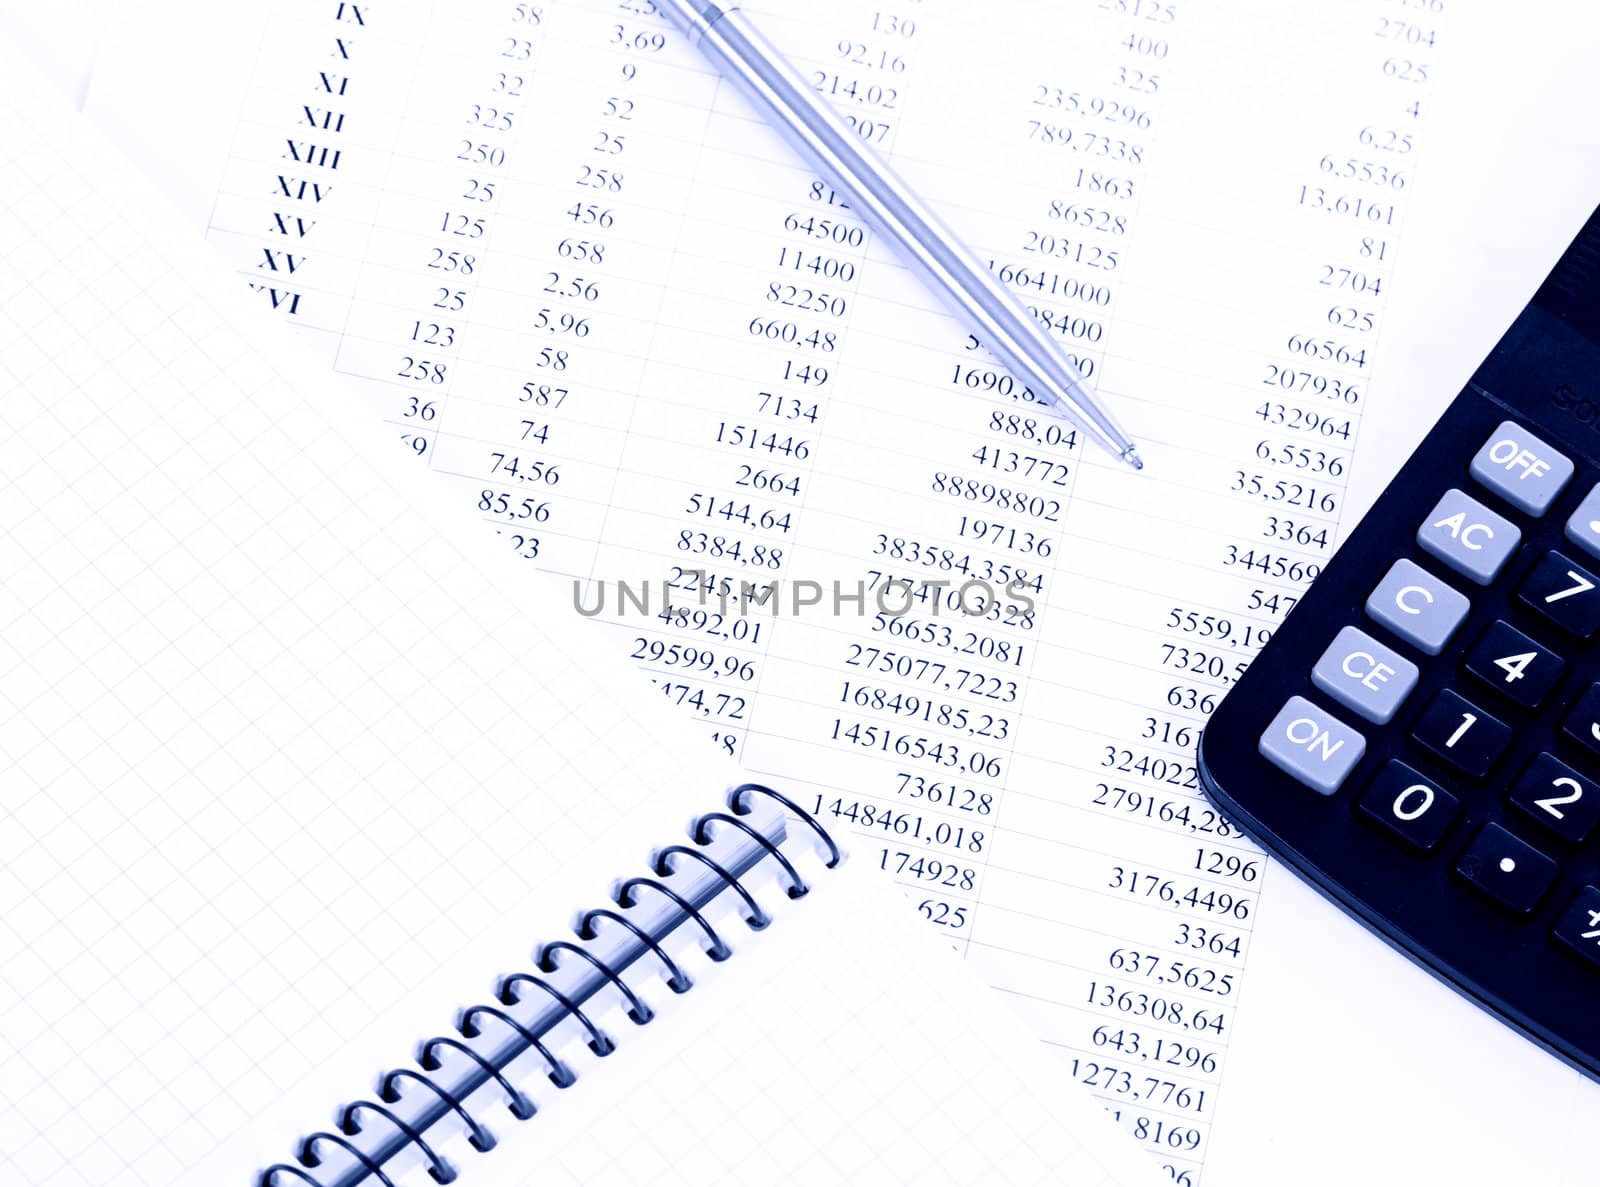 calculator and the financial report. A workplace of the businessman